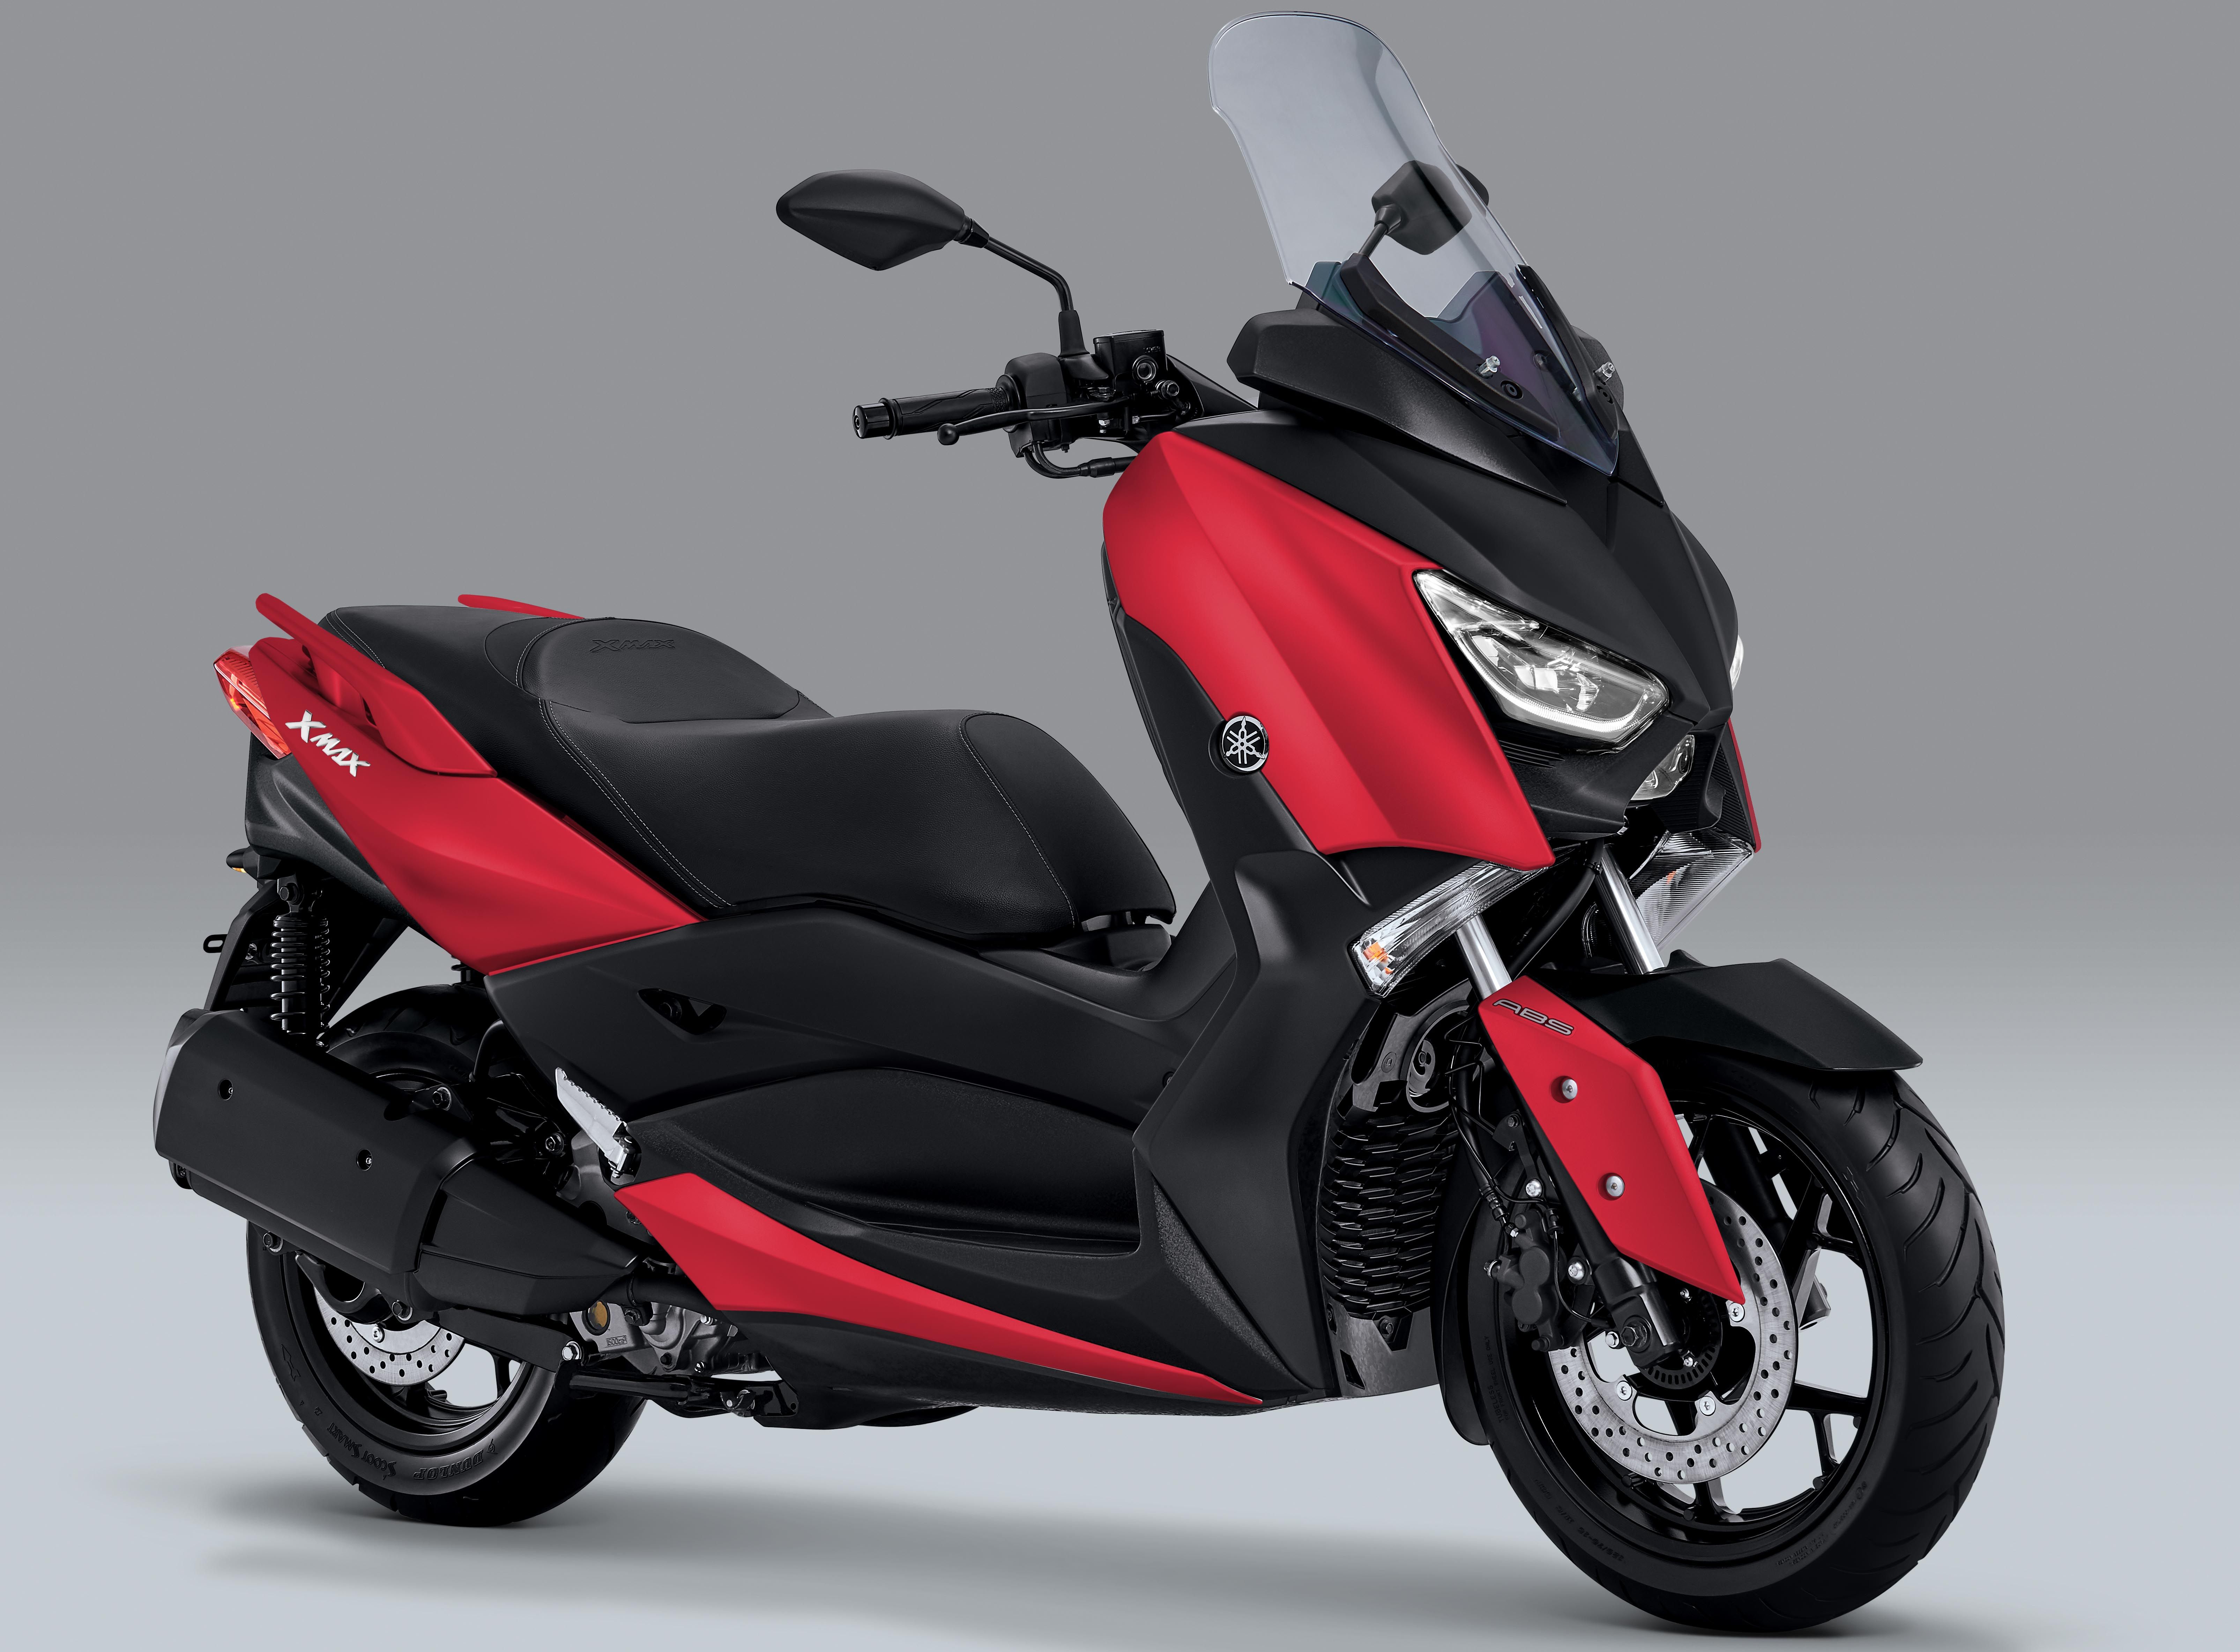 2019 Yamaha X Max Scooter In New Colours Rm21 225 Paultan Org